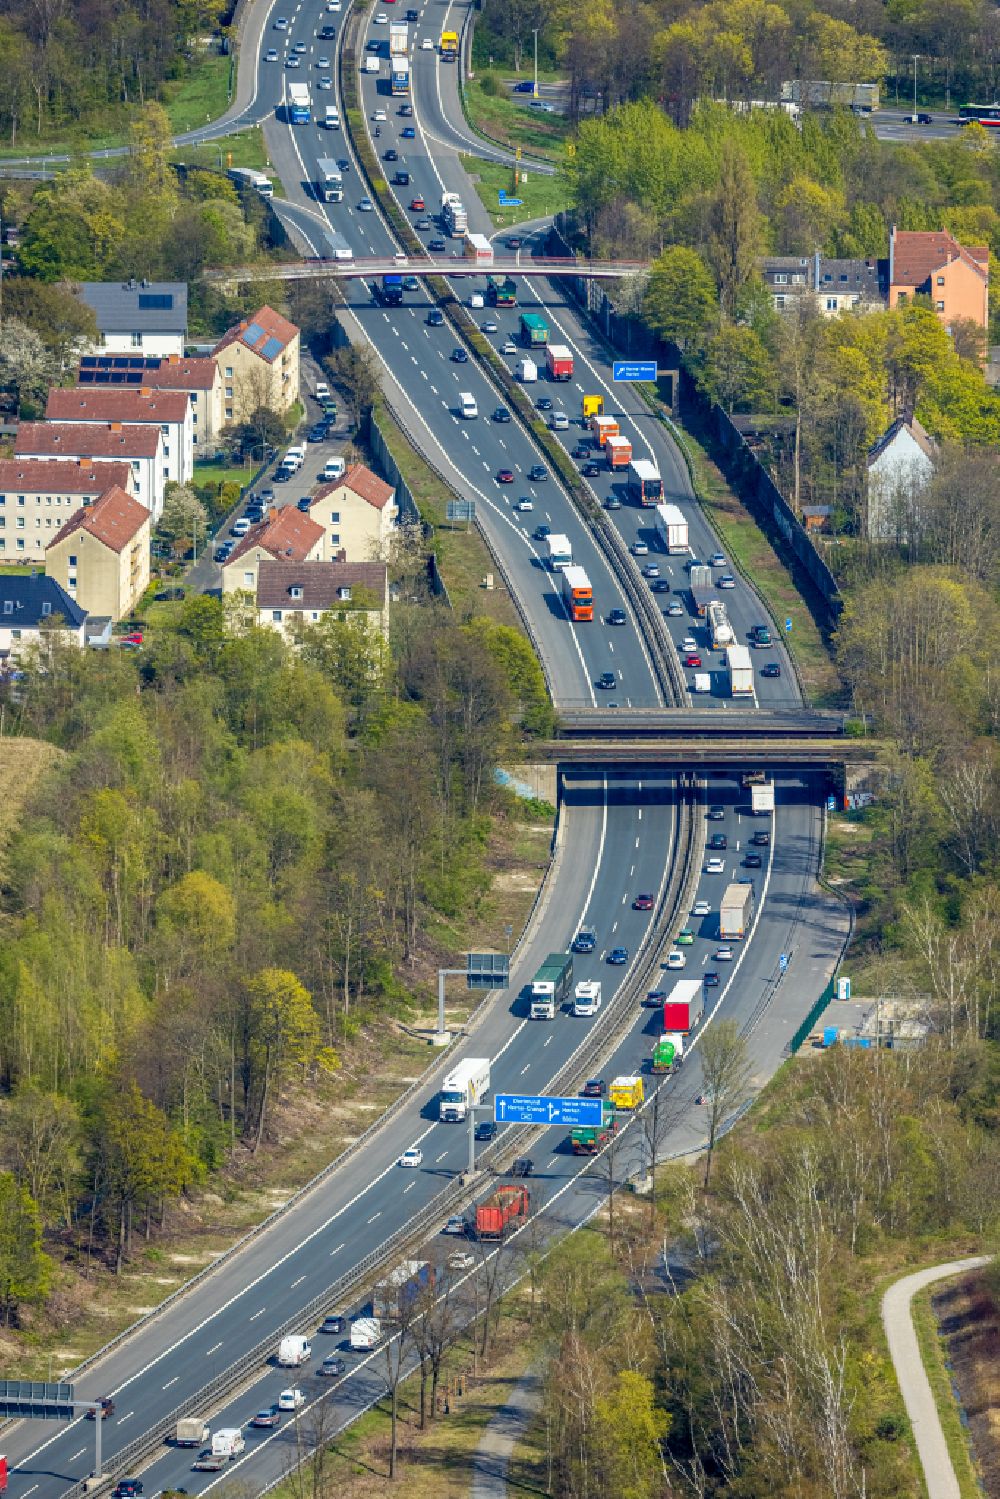 Aerial photograph Herne - Lorries crowded in traffic jams in the lanes of the route of the motorway BAB A42 in the district Wanne-Eickel in Herne at Ruhrgebiet in the state North Rhine-Westphalia, Germany